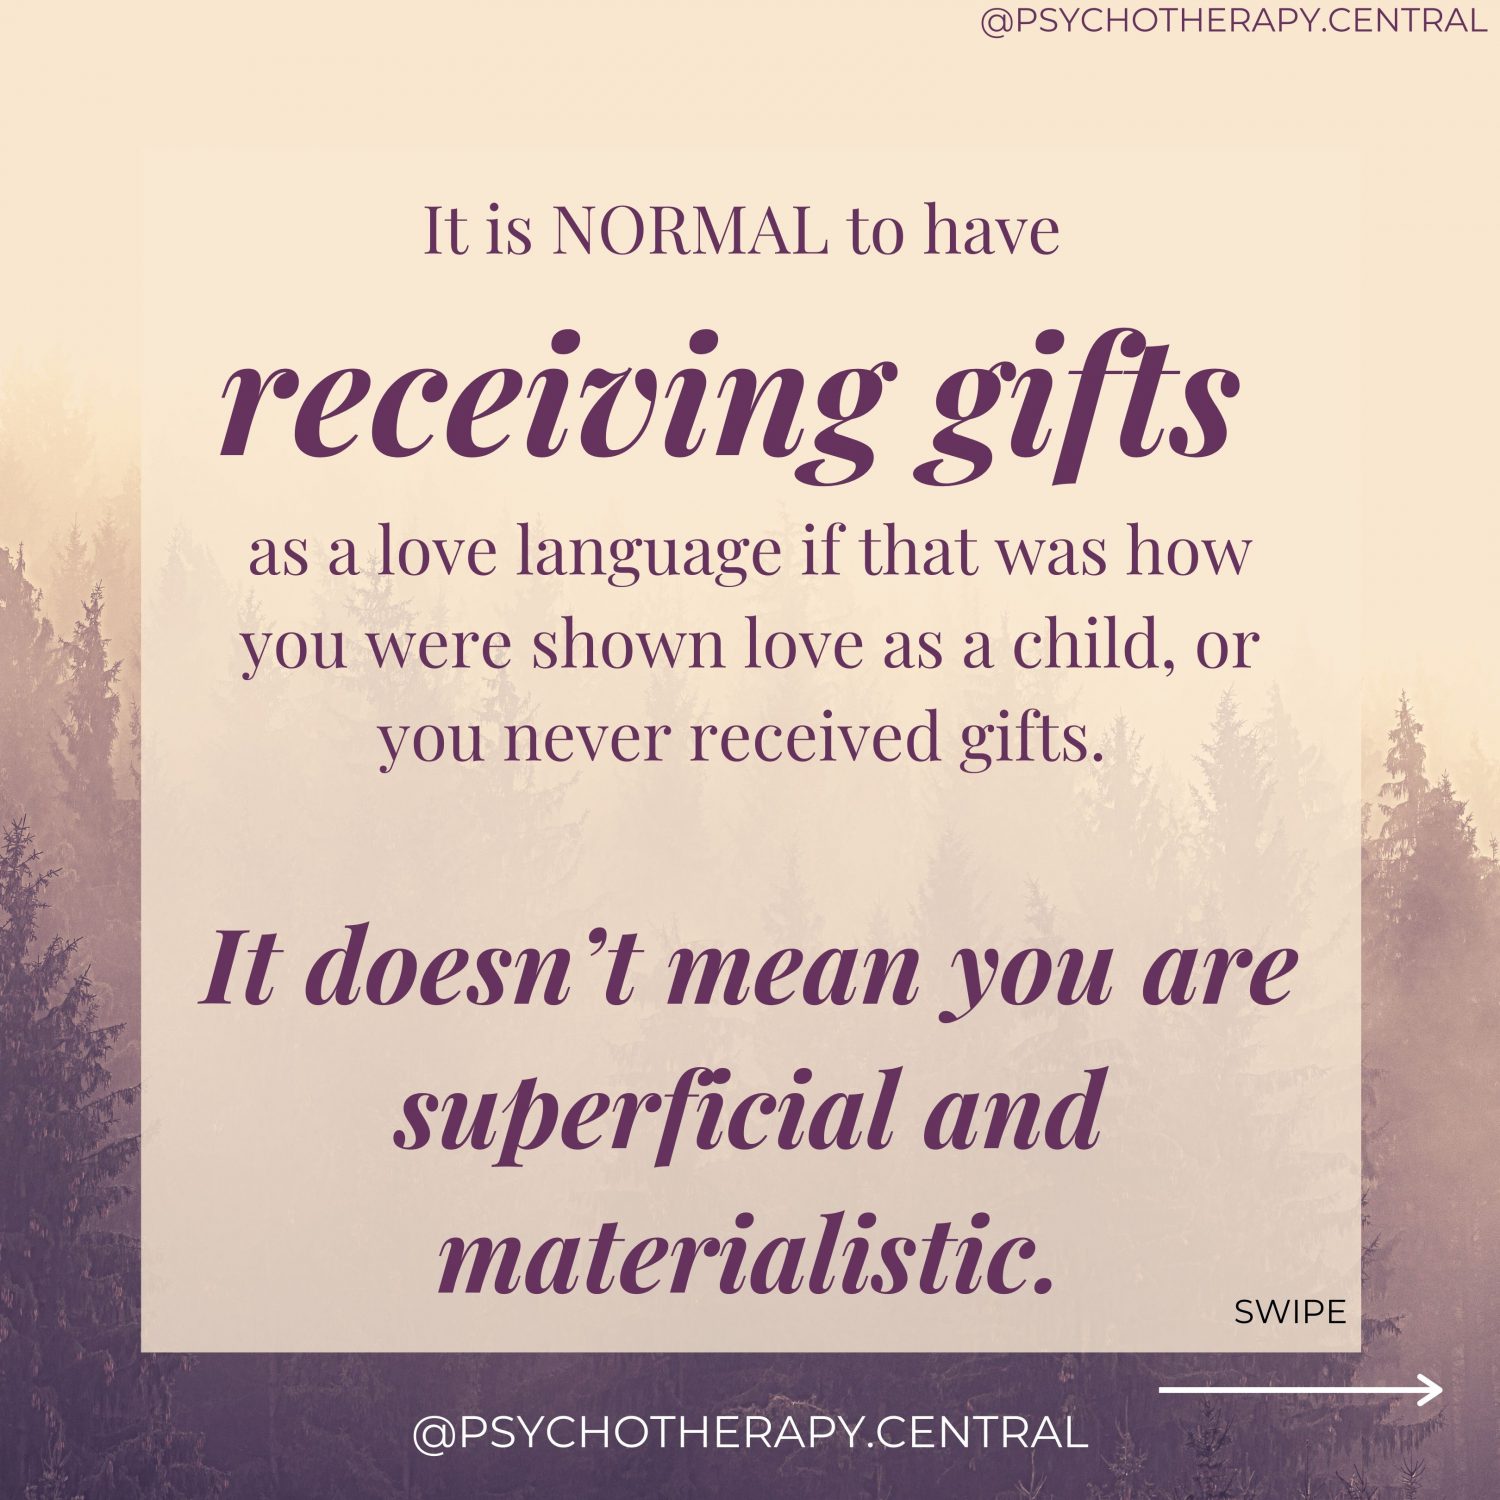 Wanting to Receive Gifts as a Love Language is not Superficial and Materialistic